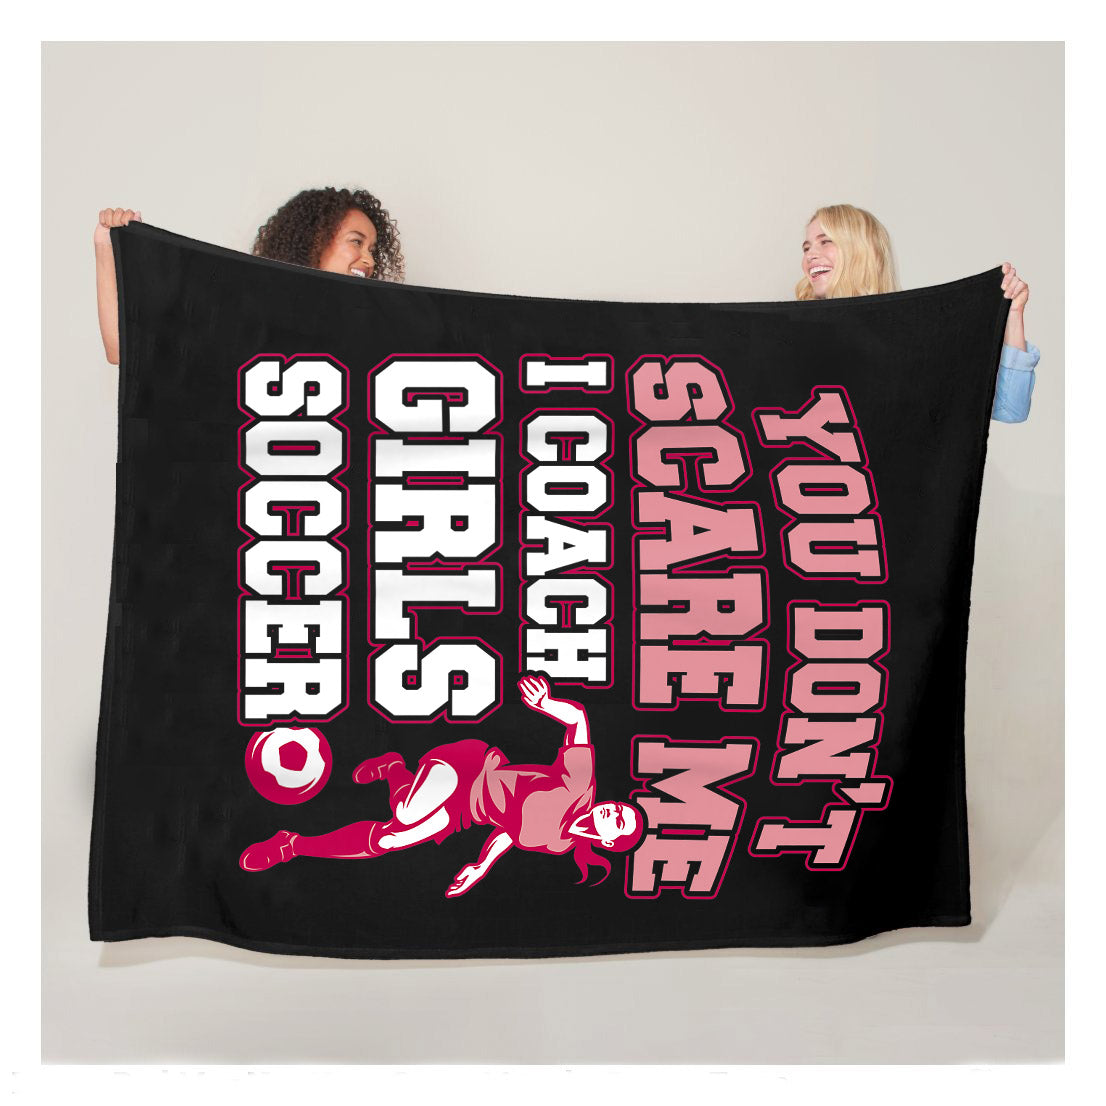 You Dont Scare Me I Coach Girls Soccer Sherpa Blanket